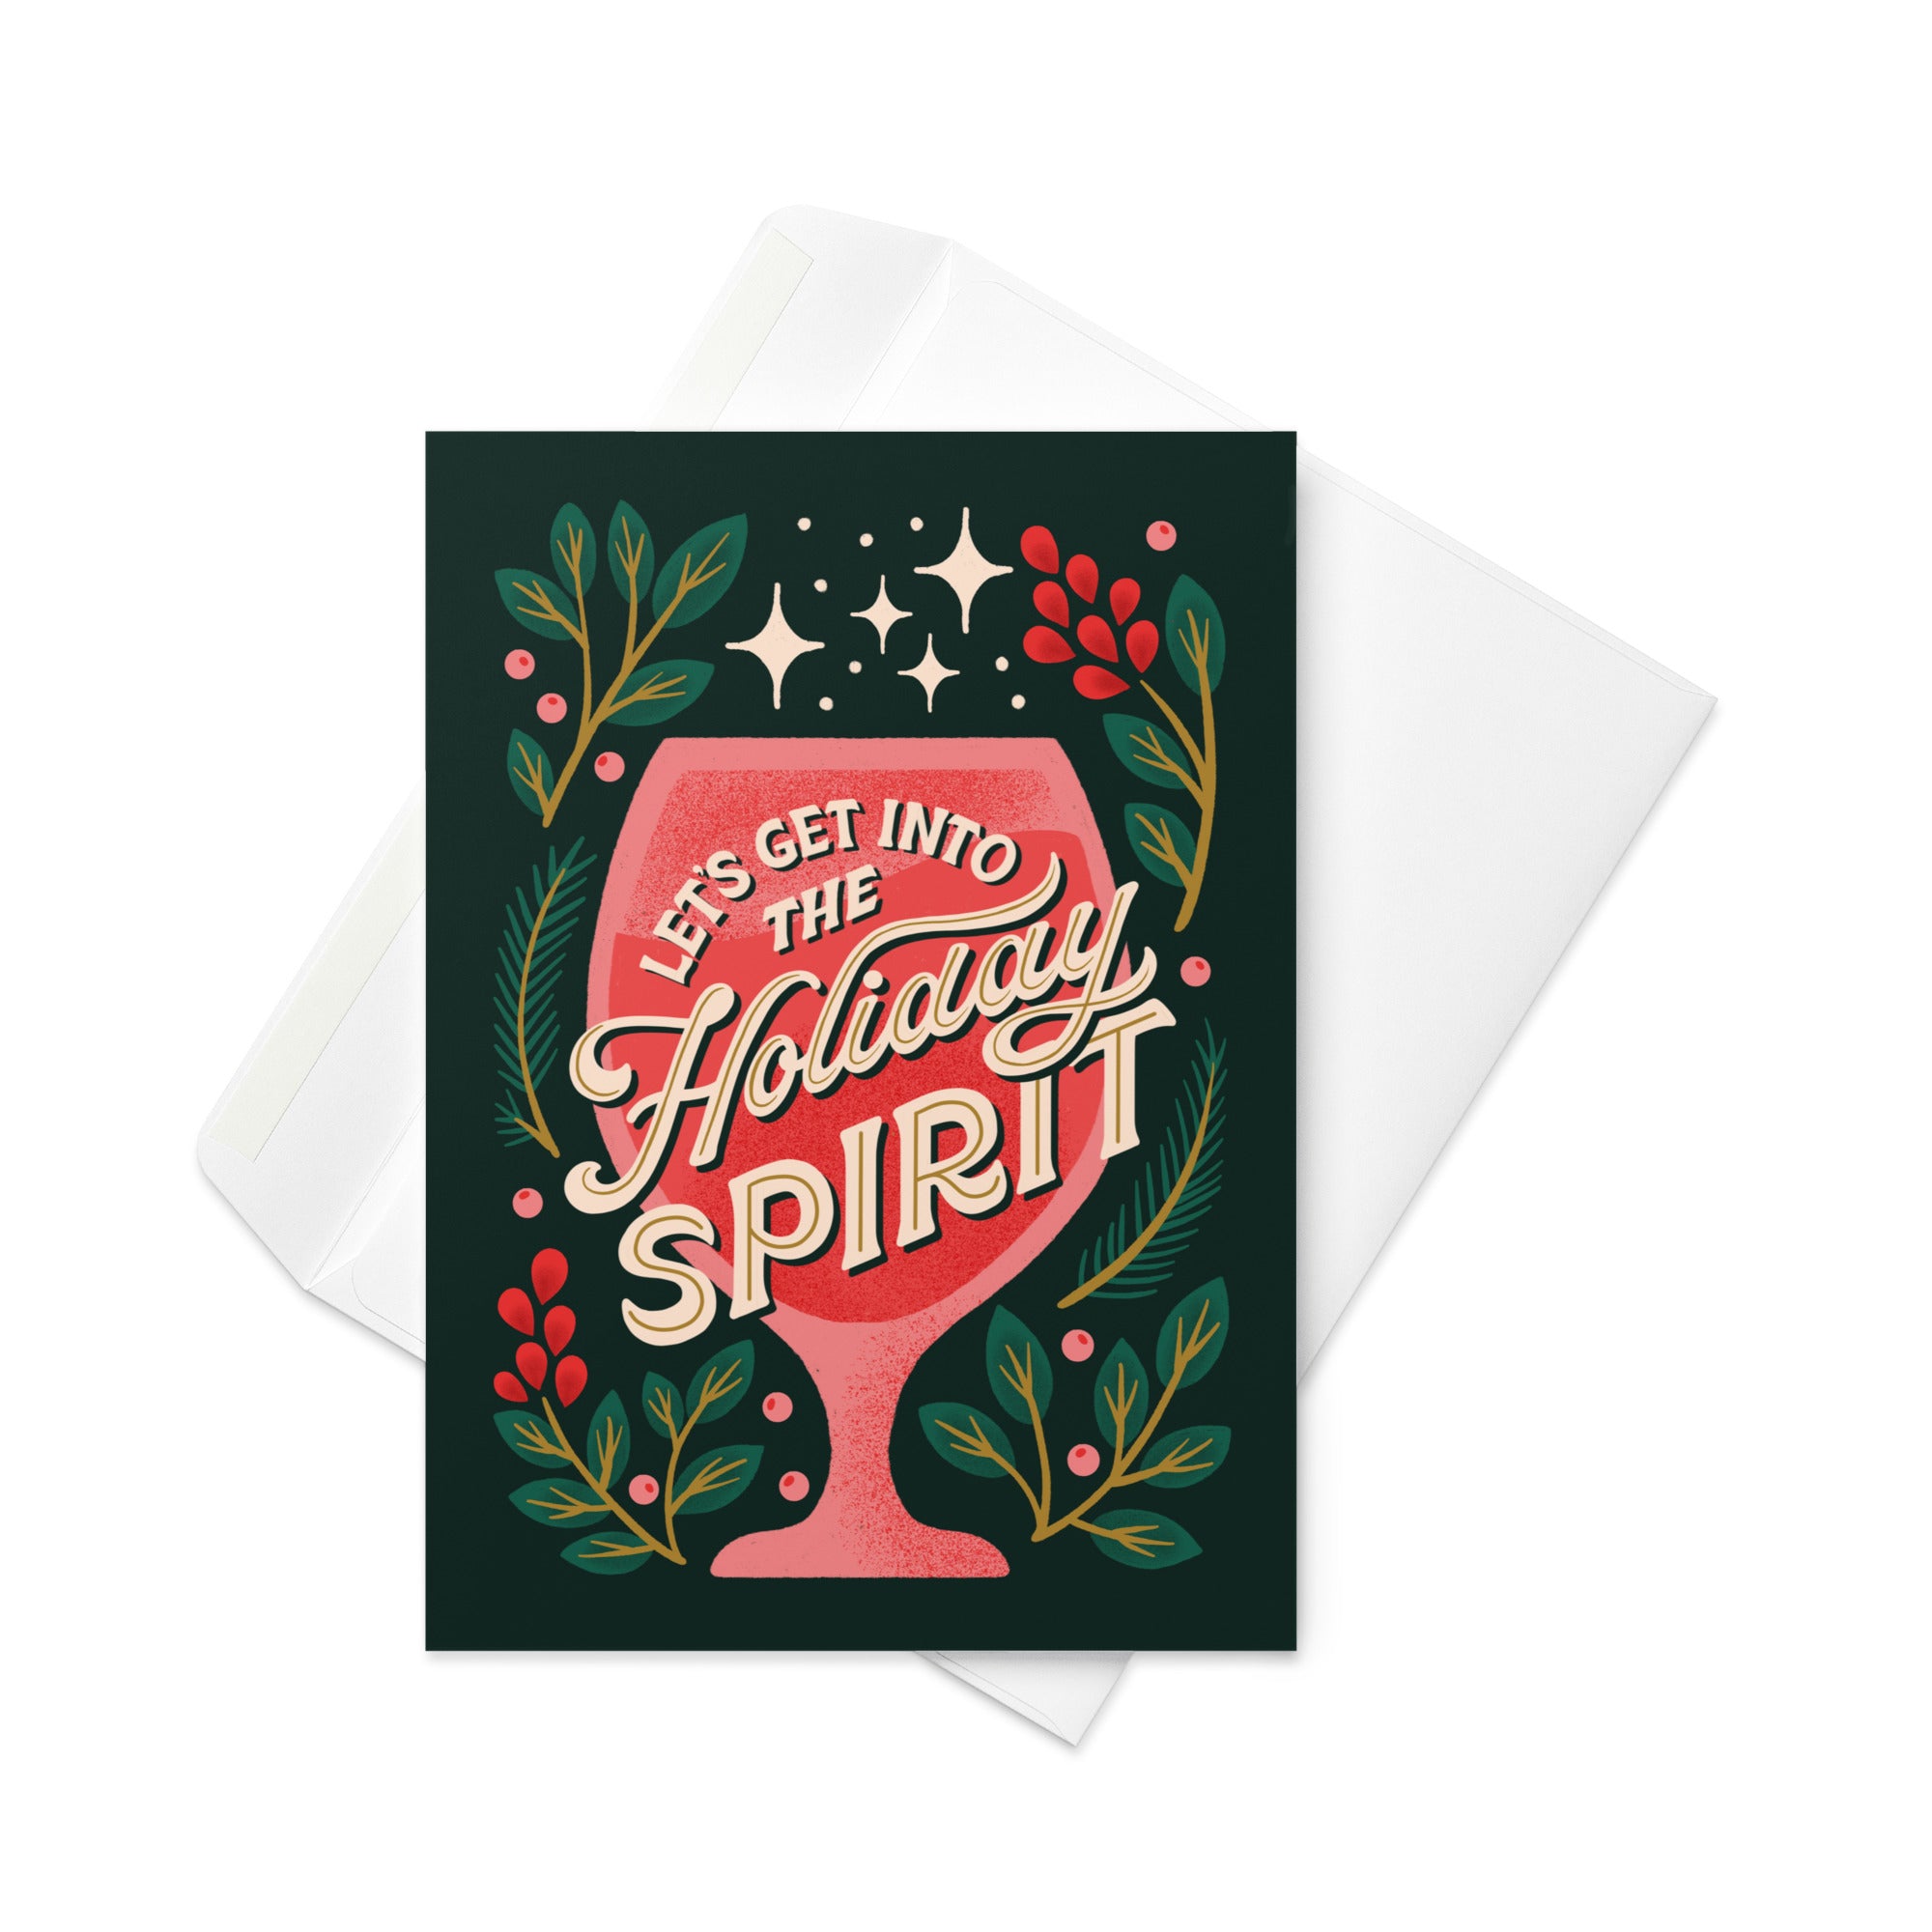 Let's Get into the Holiday Spirit Greeting Card